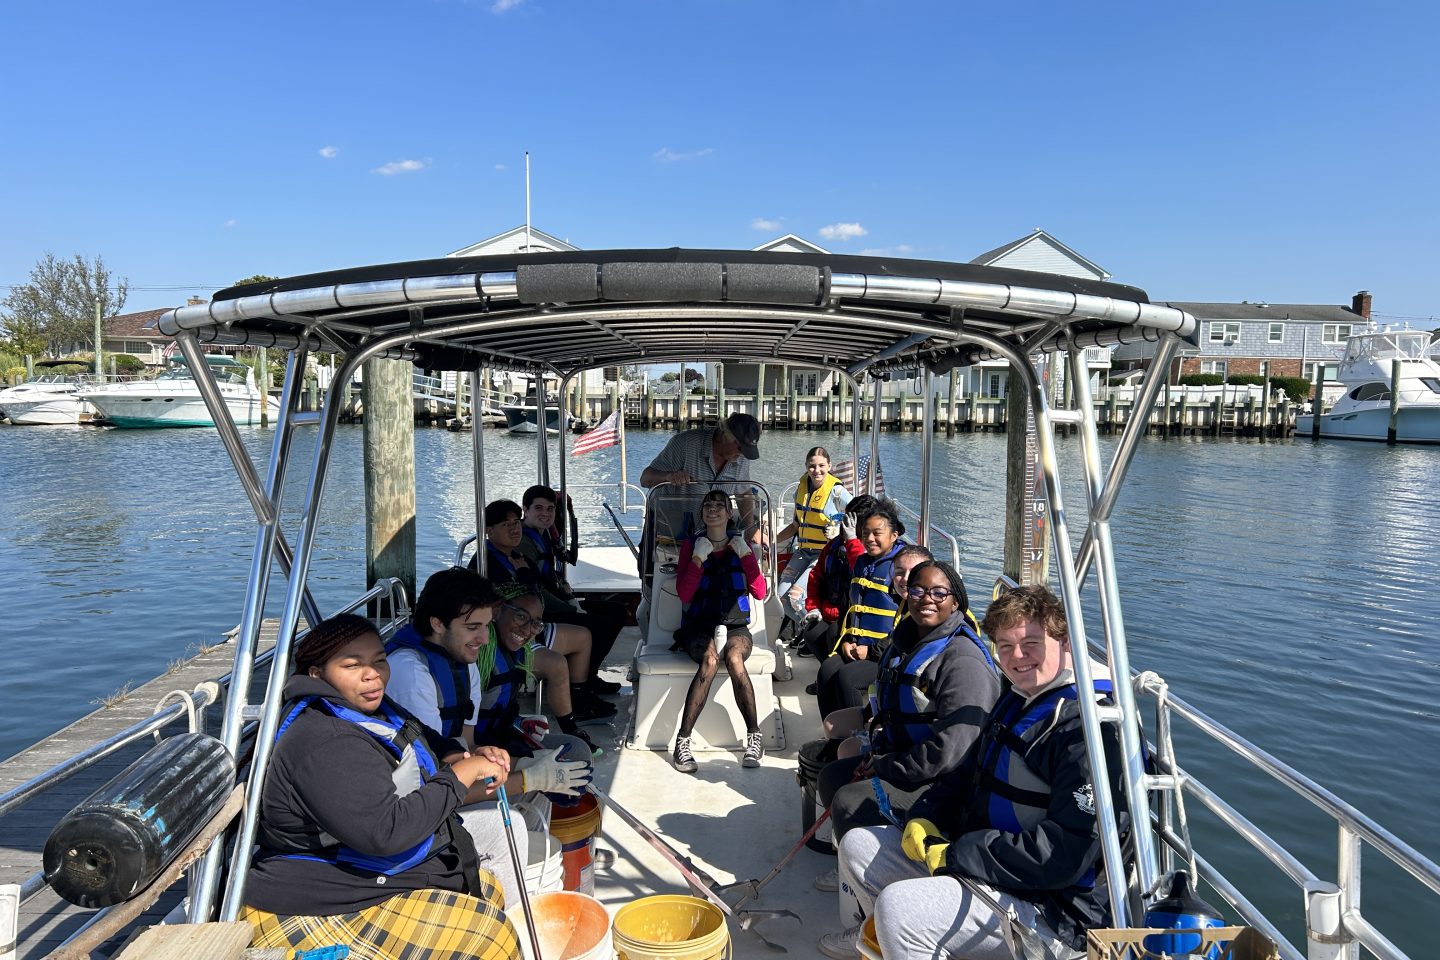 Adelphi students head out on the boat for Operation SPLASH